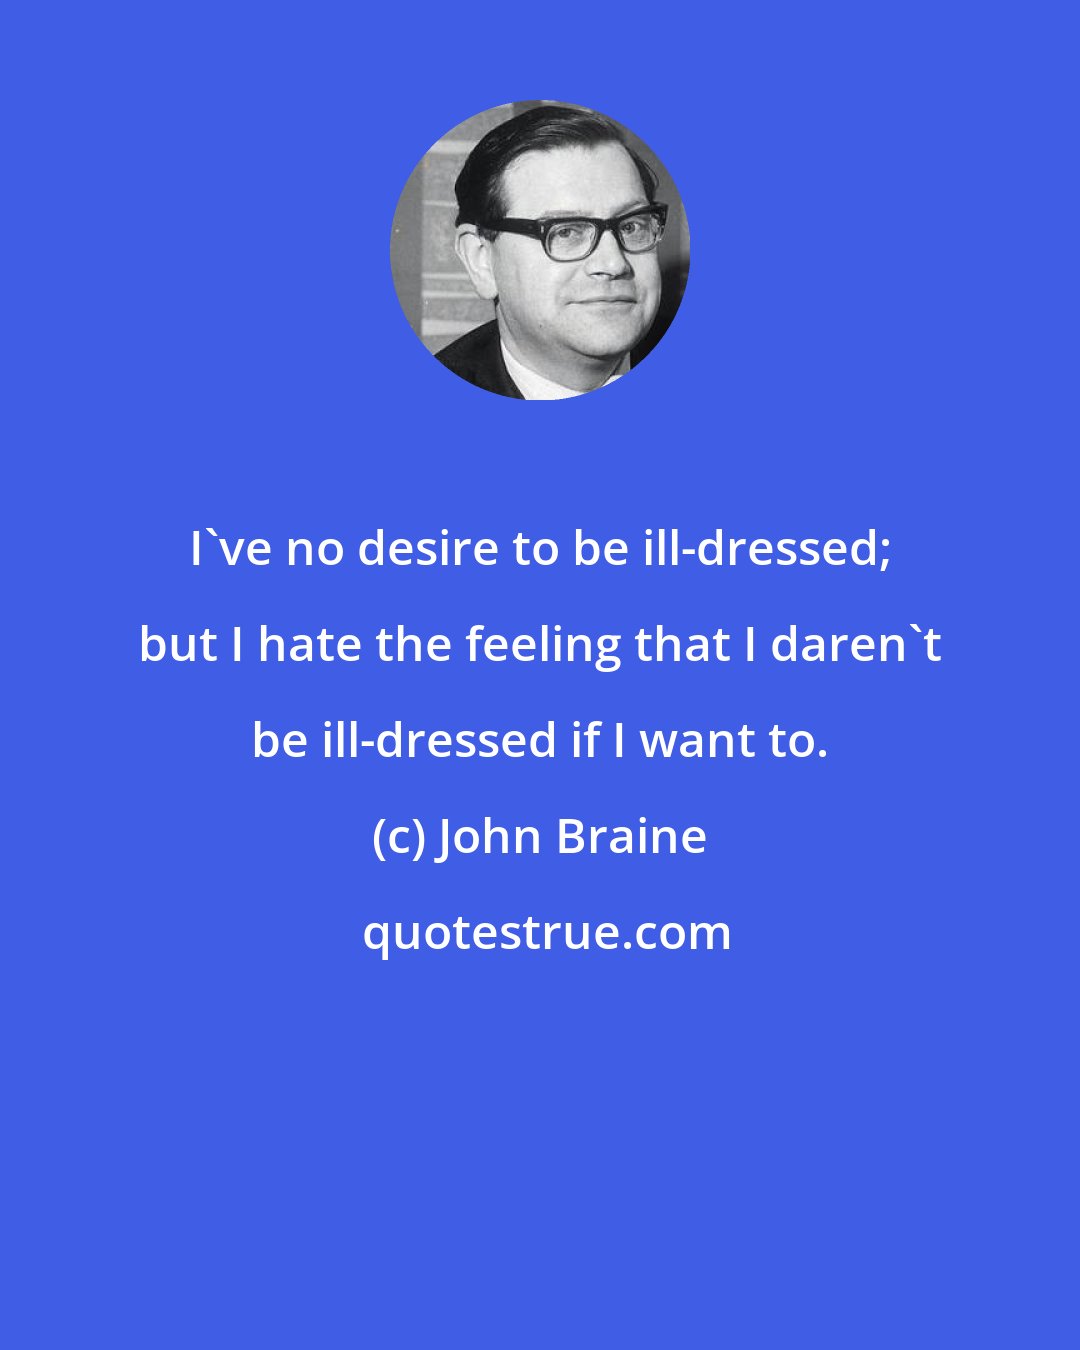 John Braine: I've no desire to be ill-dressed; but I hate the feeling that I daren't be ill-dressed if I want to.